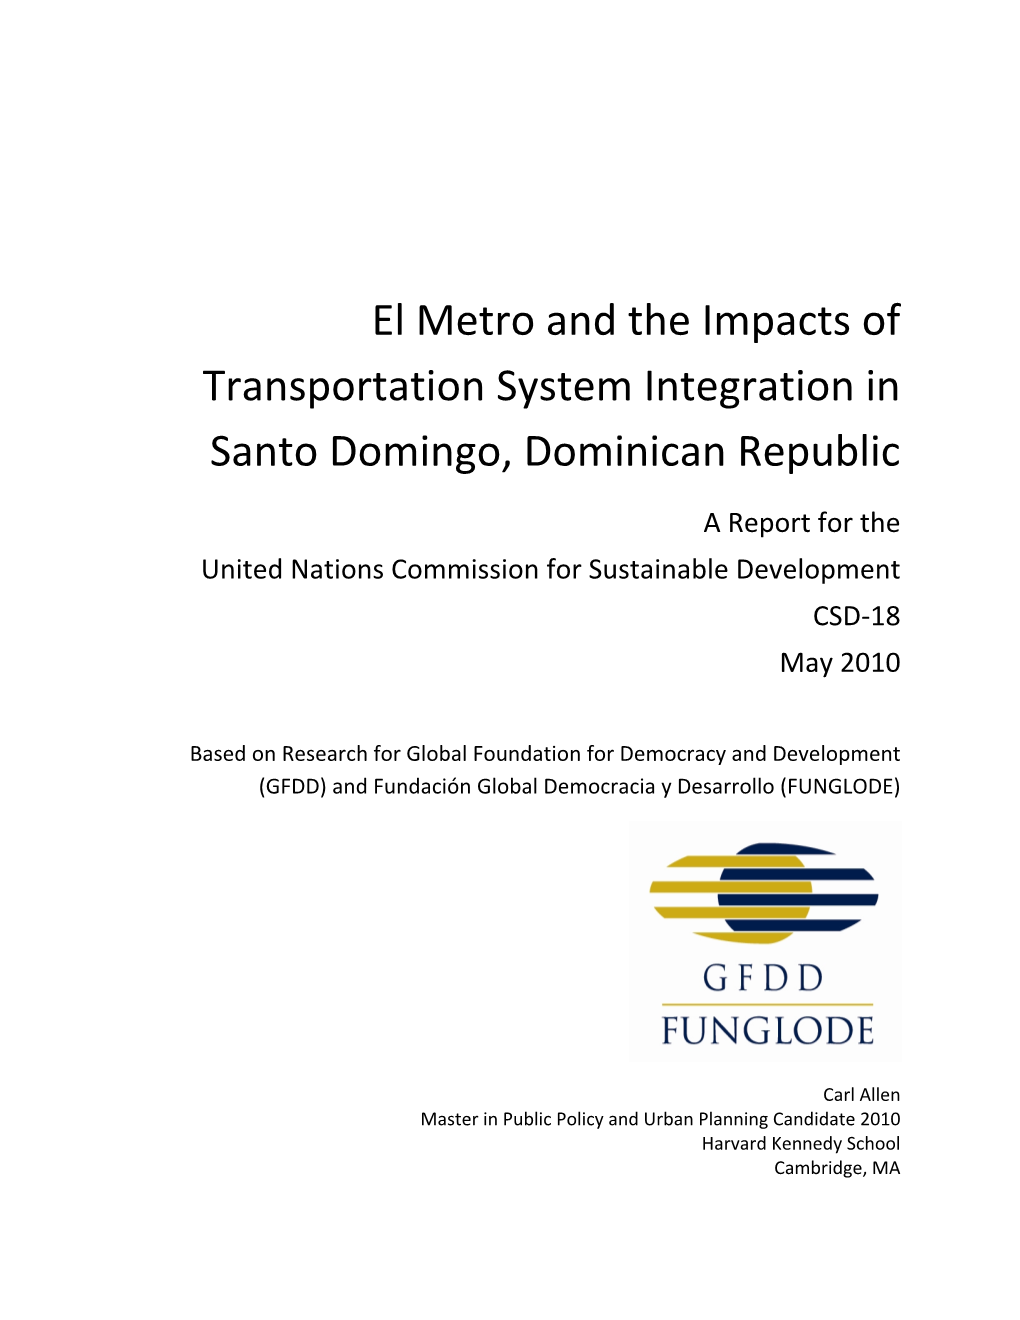 El Metro and the Impacts of Transportation System Integration in Santo Domingo, Dominican Republic